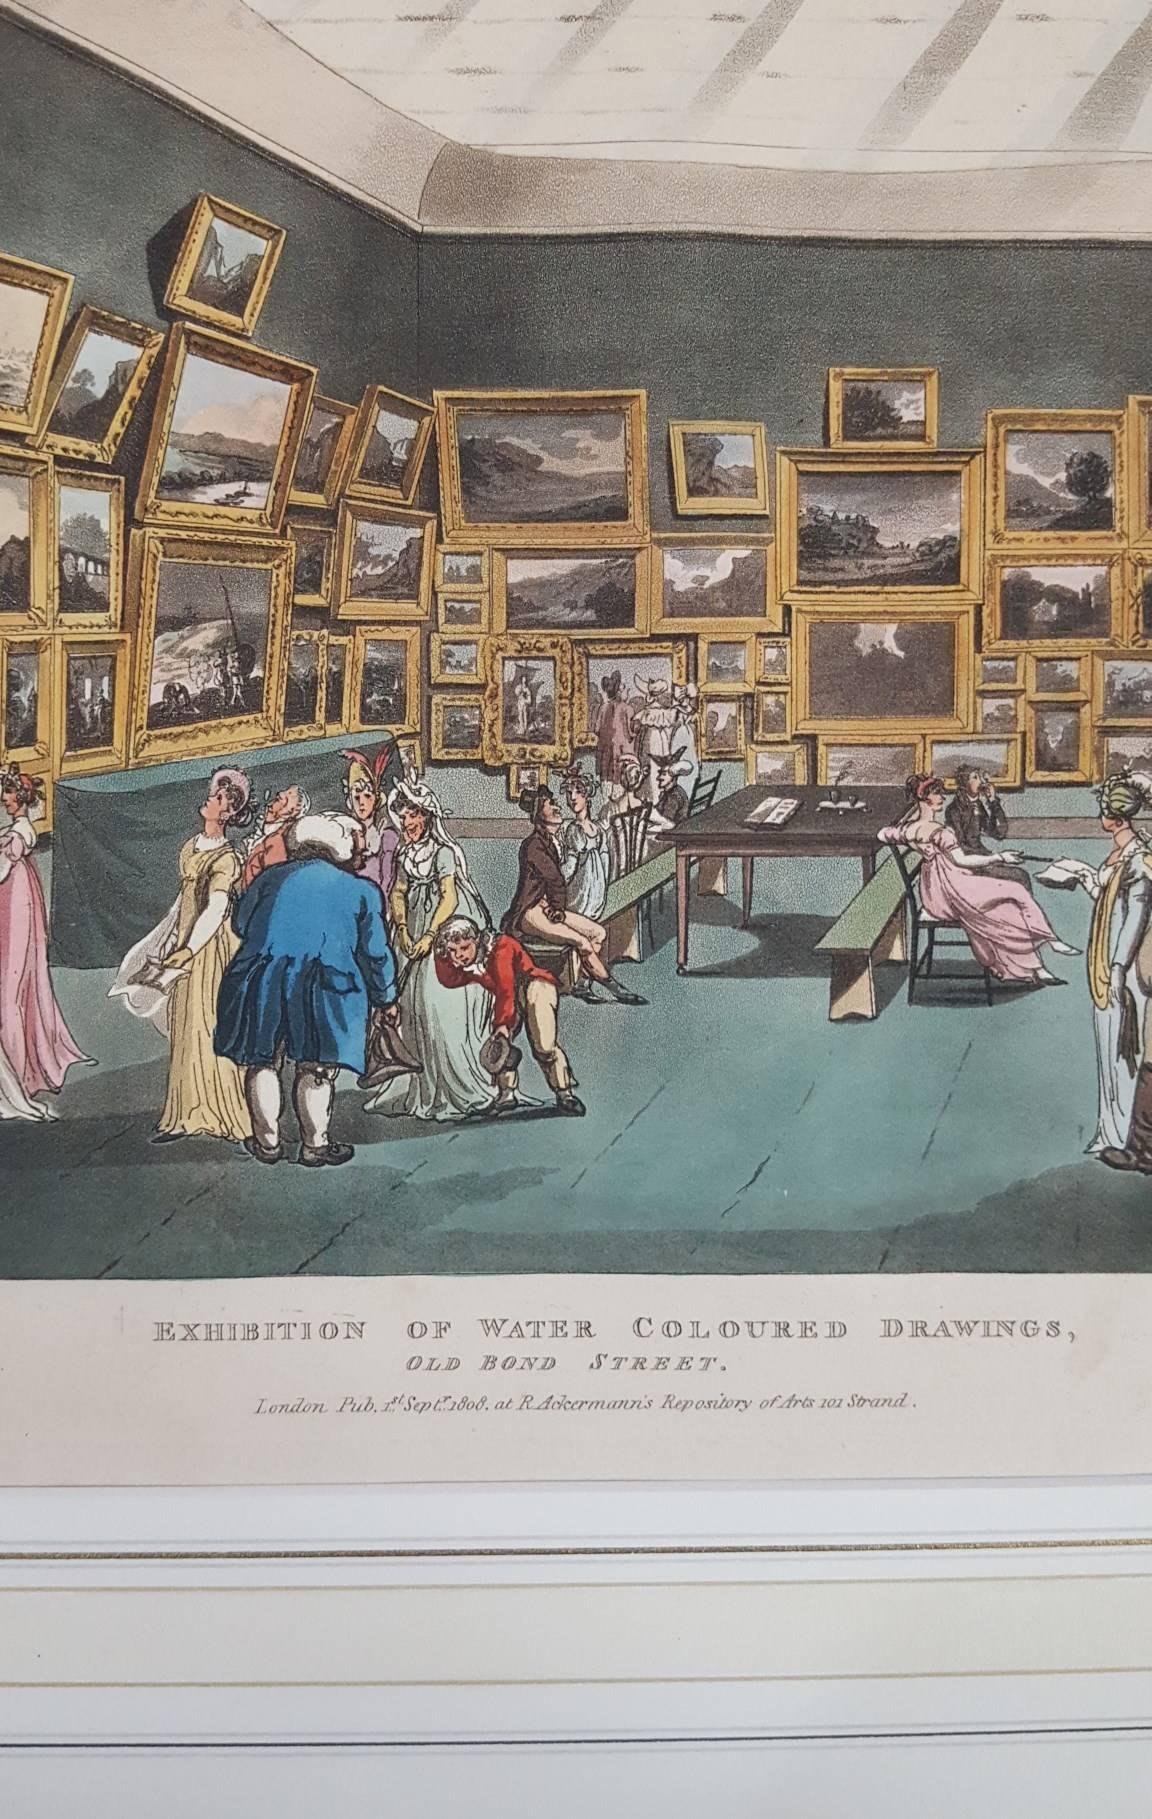 Exhibition of Water Coloured Drawings, Old Bond Street - Victorian Print by Thomas Rowlandson